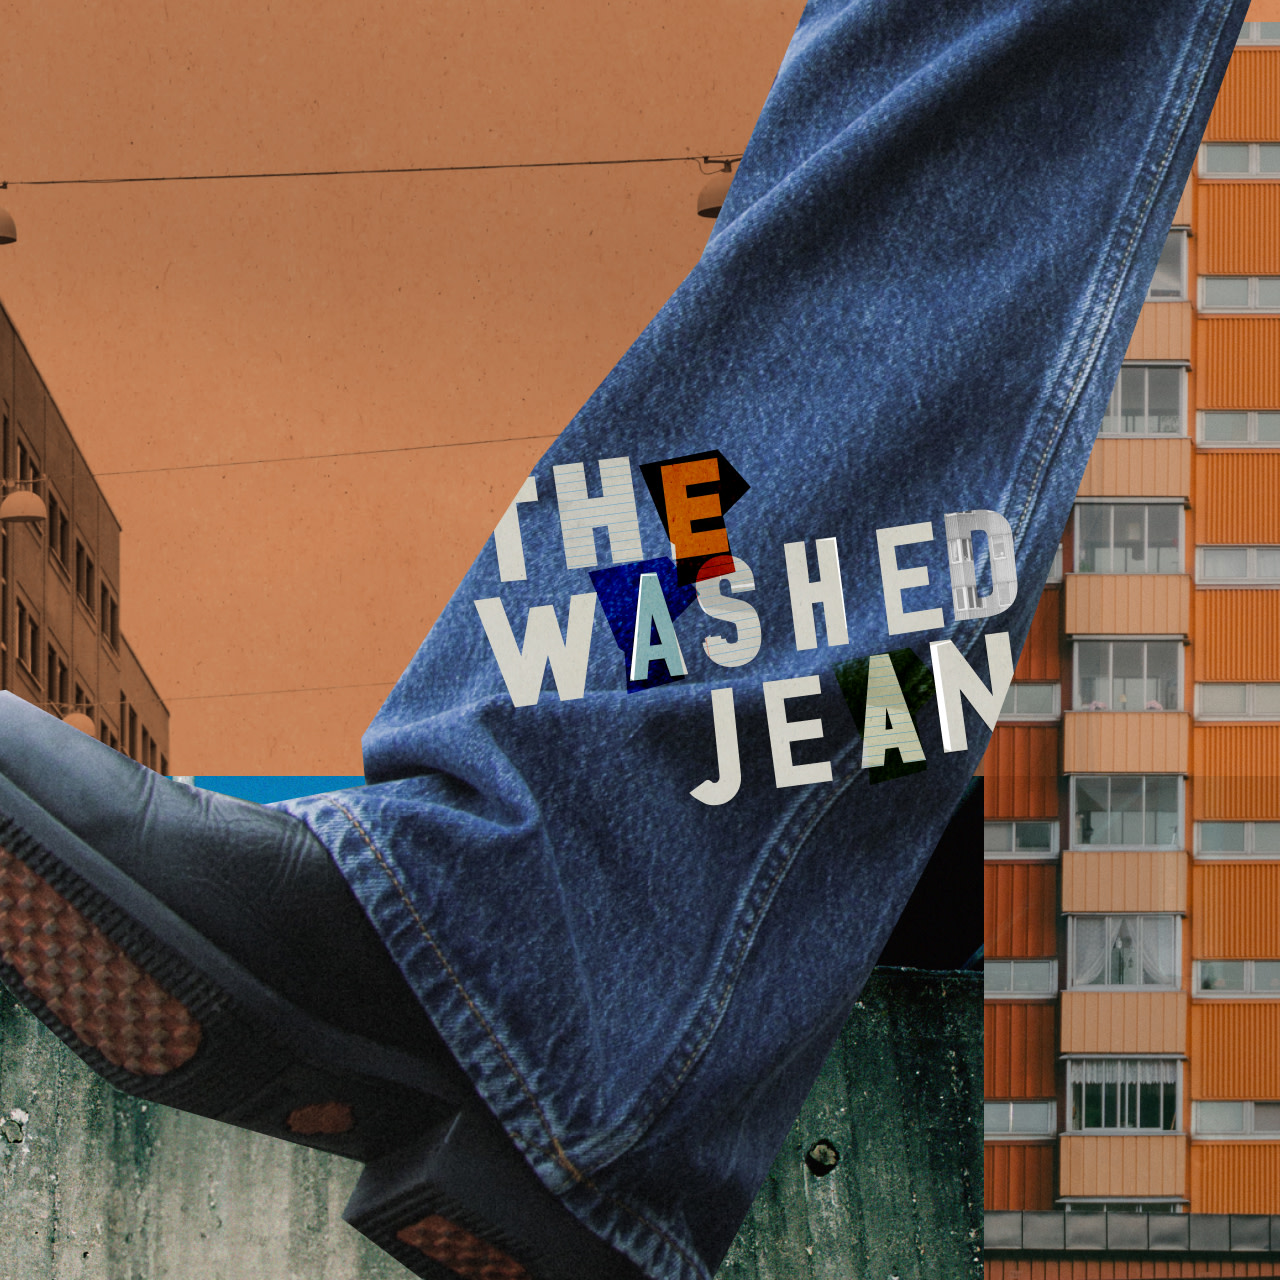 Washed jeans women